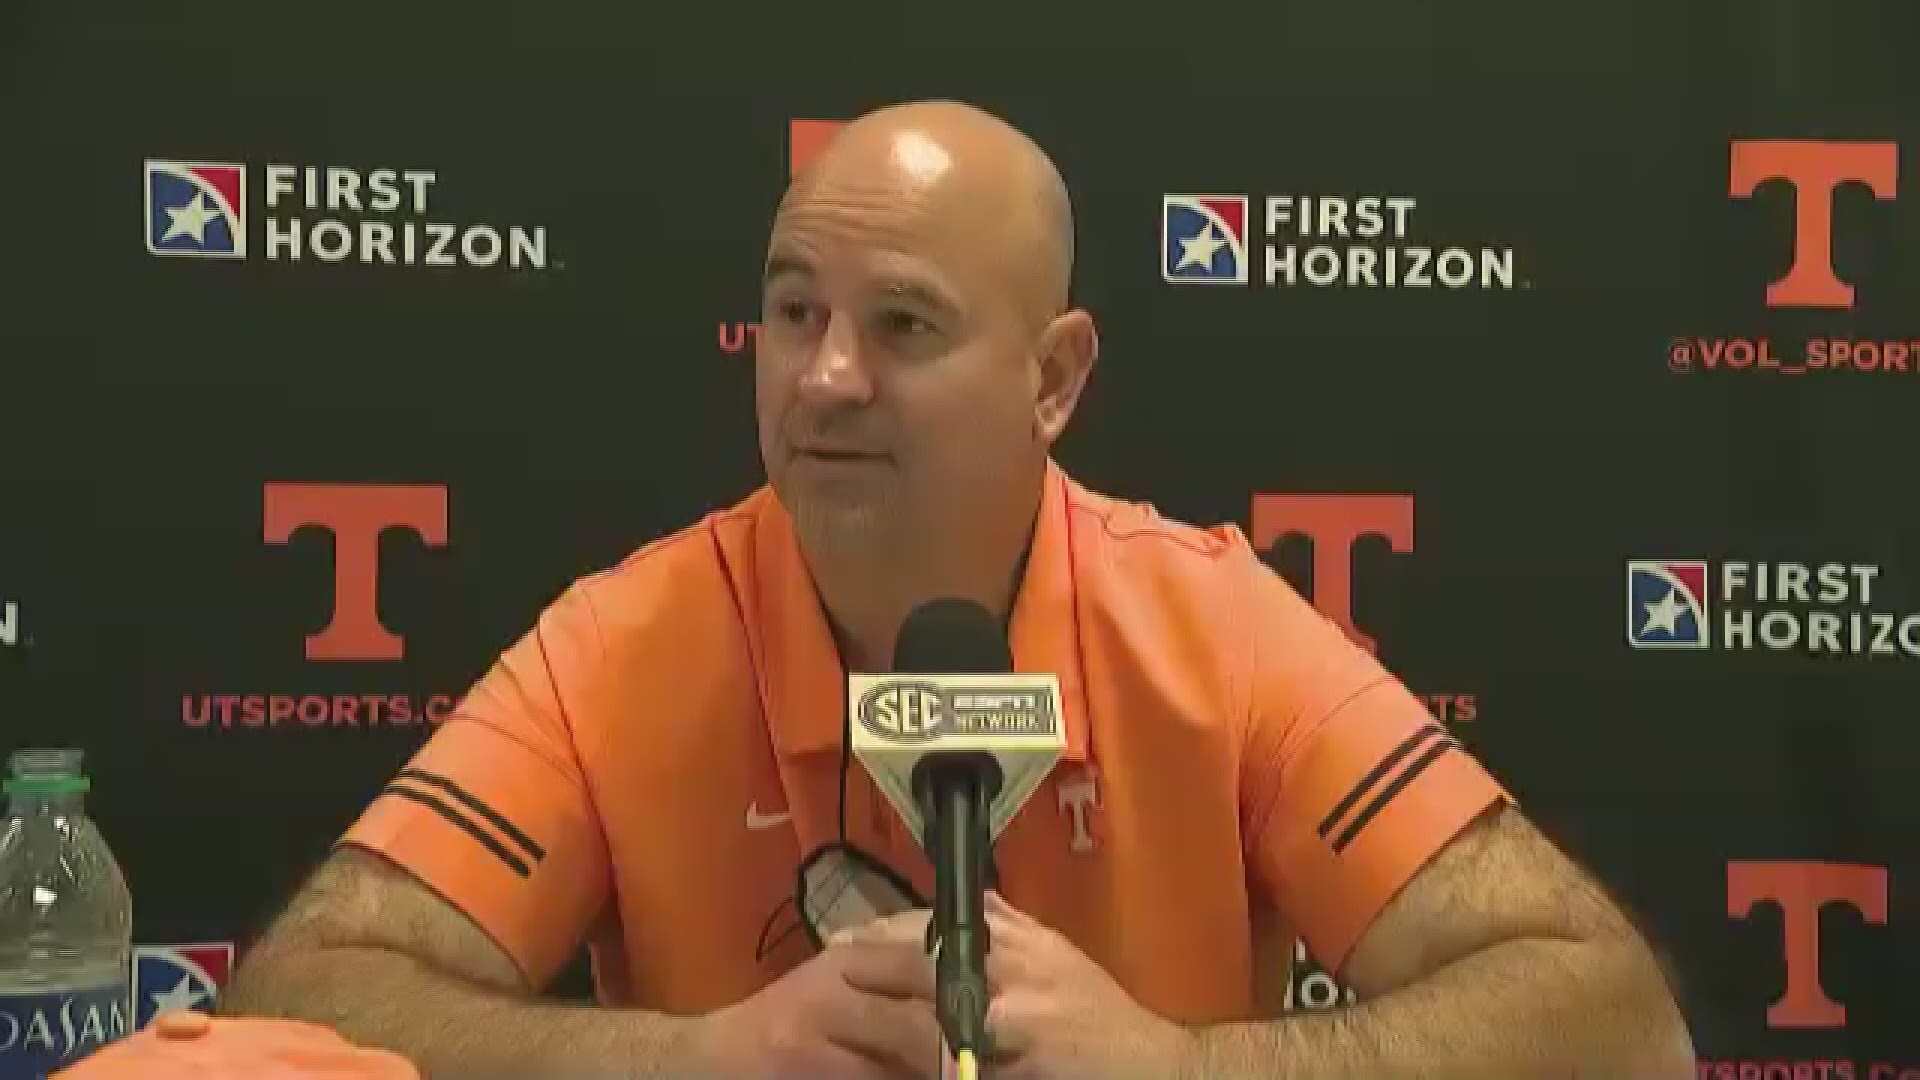 The Vols snapped their six-game losing streak with a win over Vanderbilt. Jeremy Pruitt, Bryce Thompson and Henry To'o To'o talk about getting the victory.